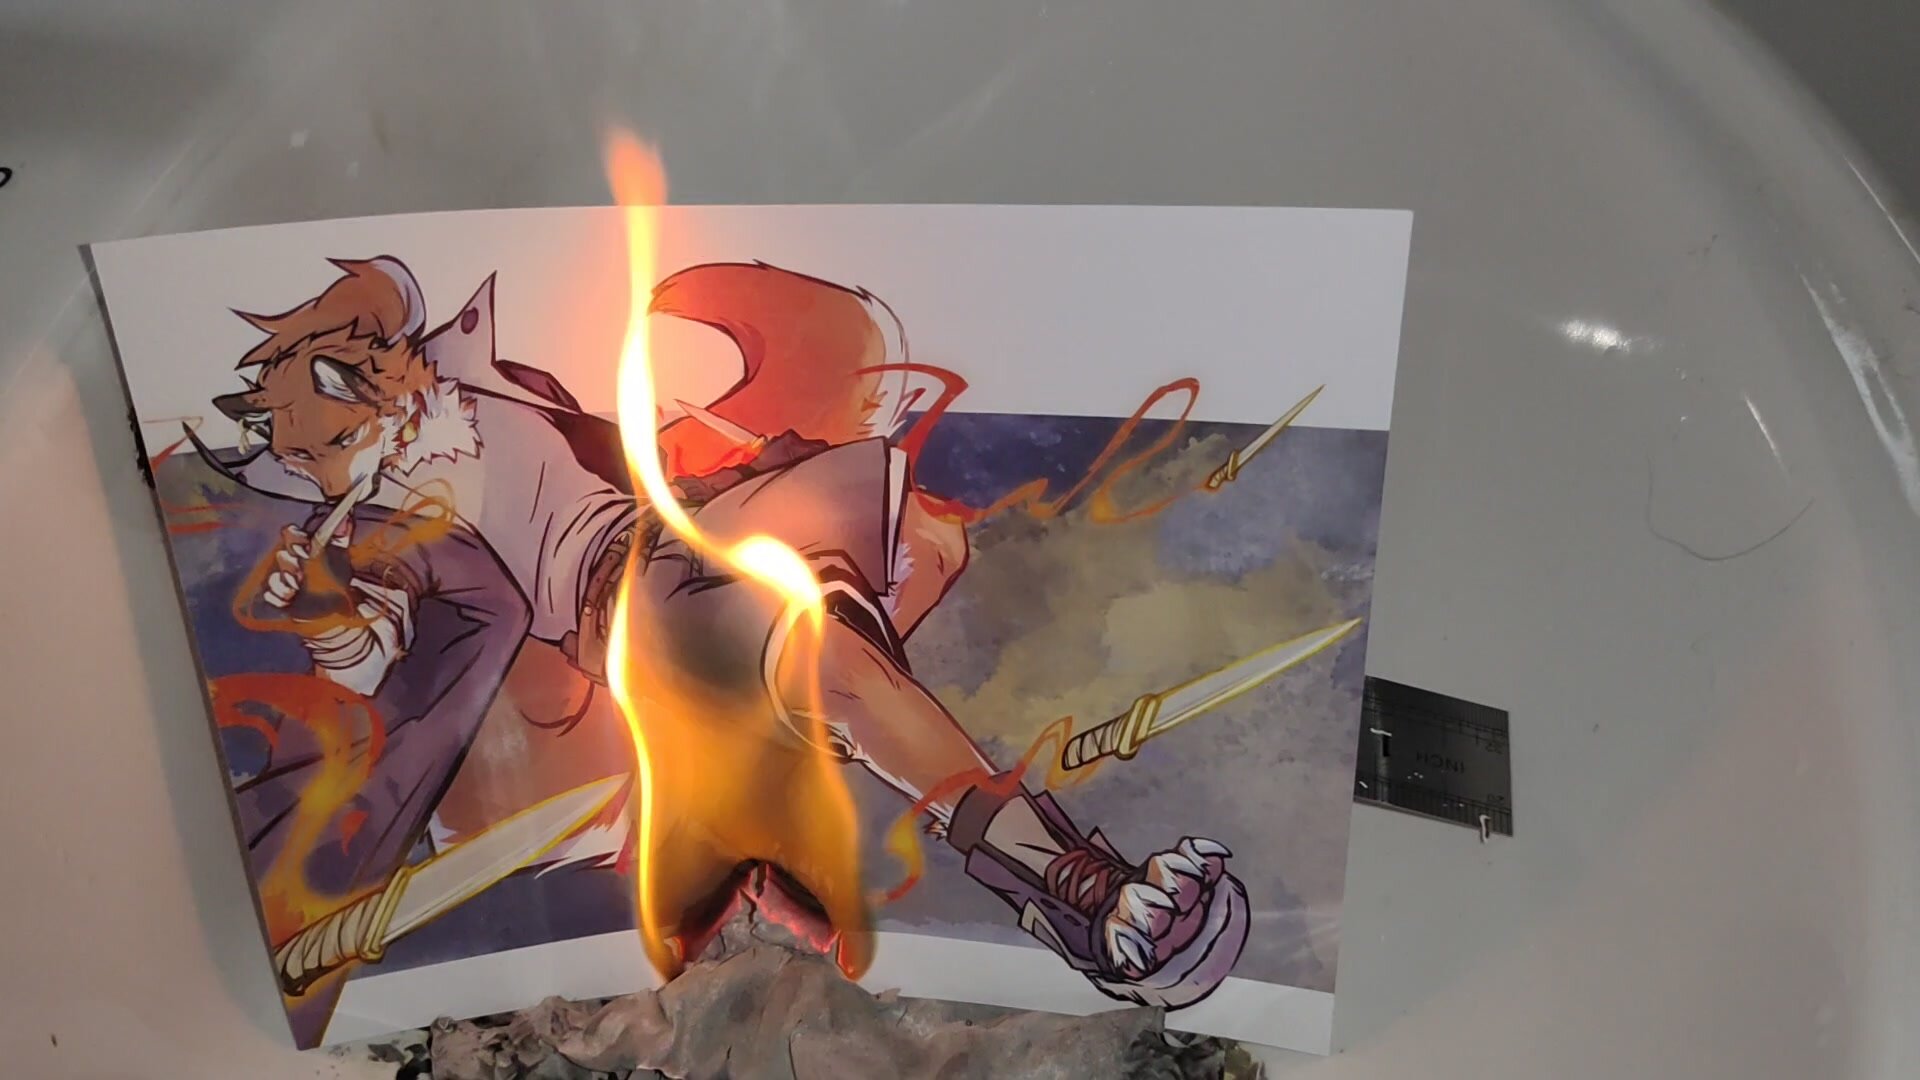 Enjoy the process of incinerating the Furry picture - video 15